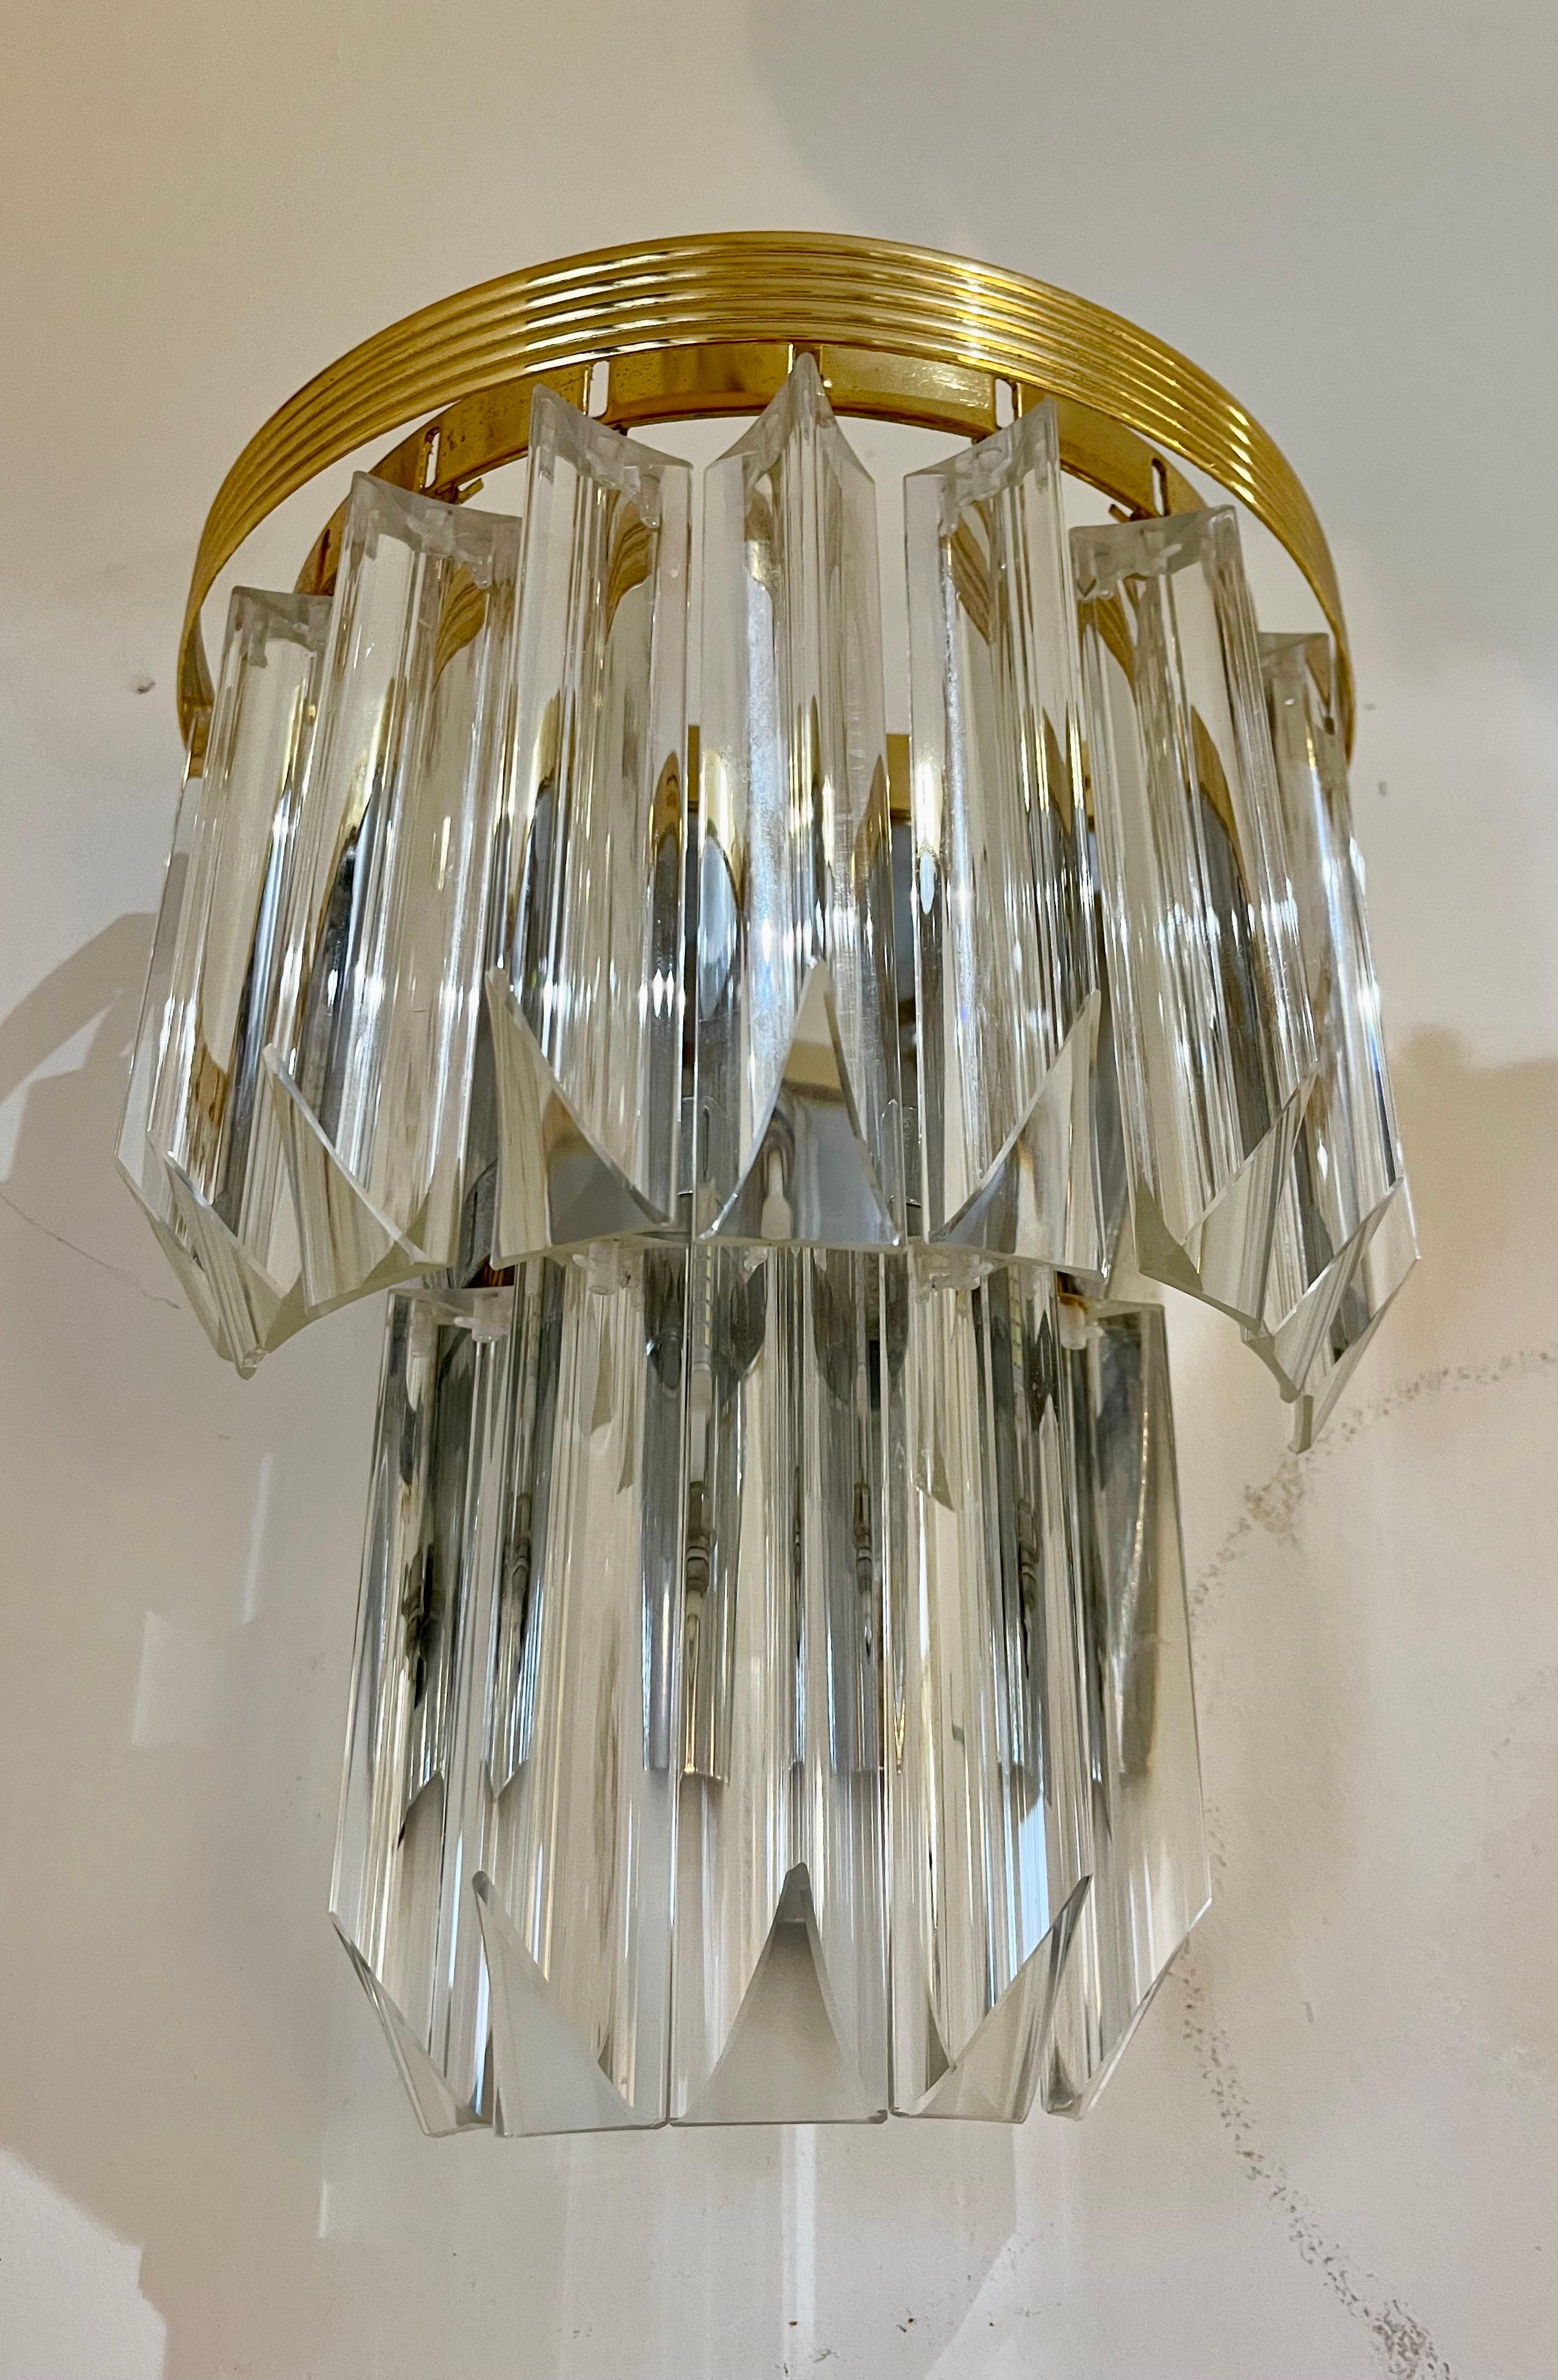 Venini design wall lighting murano glass with in iridium glass. The design and the quality of the glass make this piece the best of the design.
This wall lighting pair are in good condition.

Venini is an Italian company that is known for its